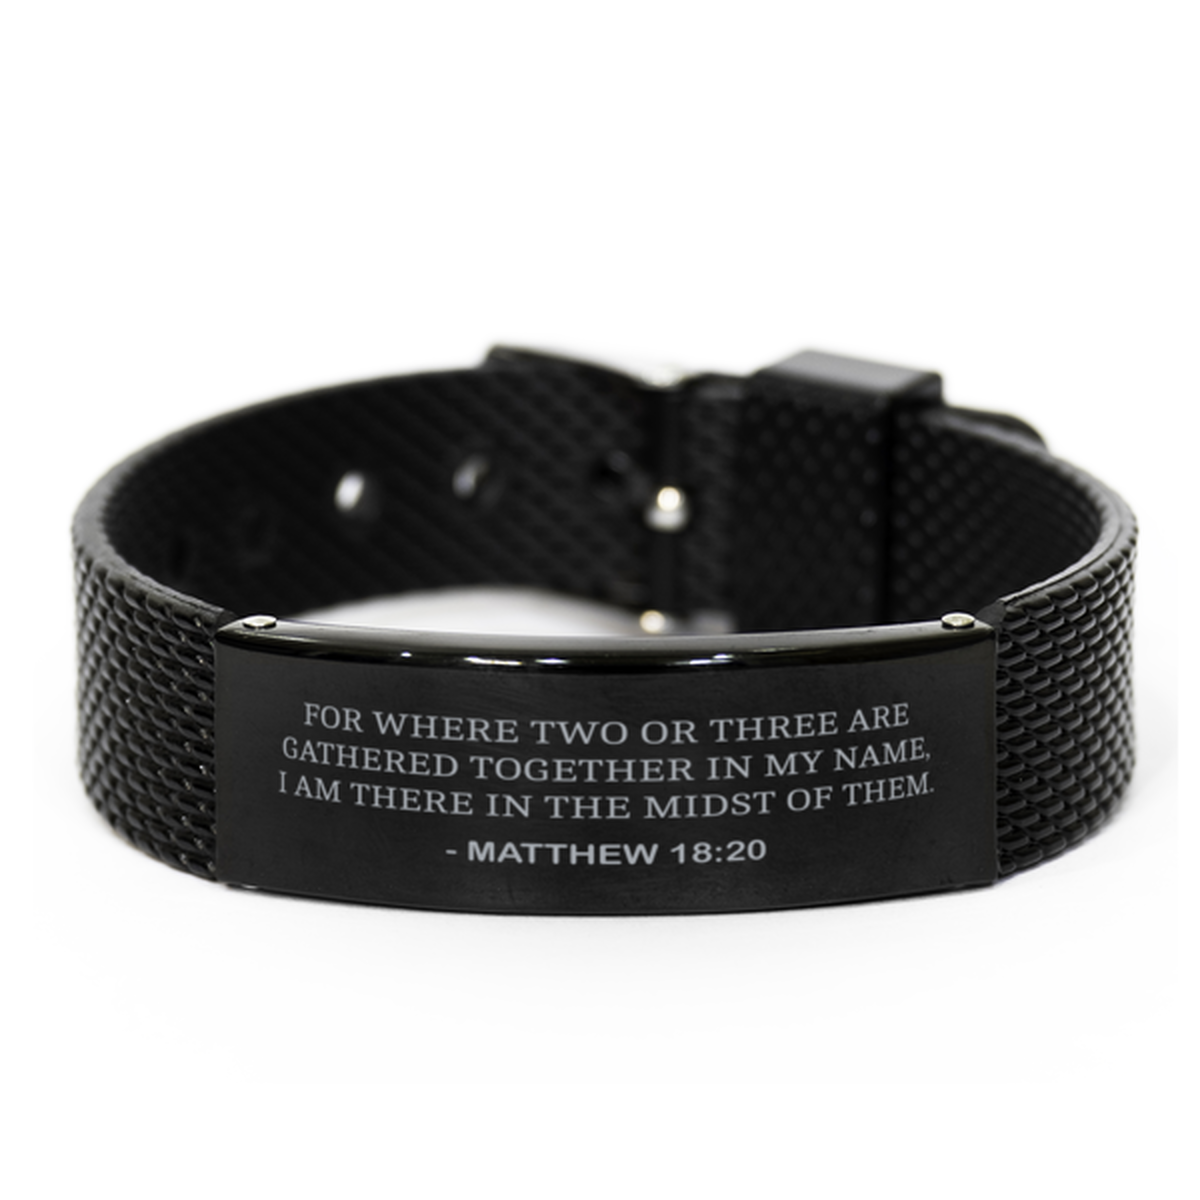 Christian Black Bracelet,, Matthew 18:20 For Where Two Or Three Are Gathered Together In, Motivational Bible Verse Gifts For Men Women